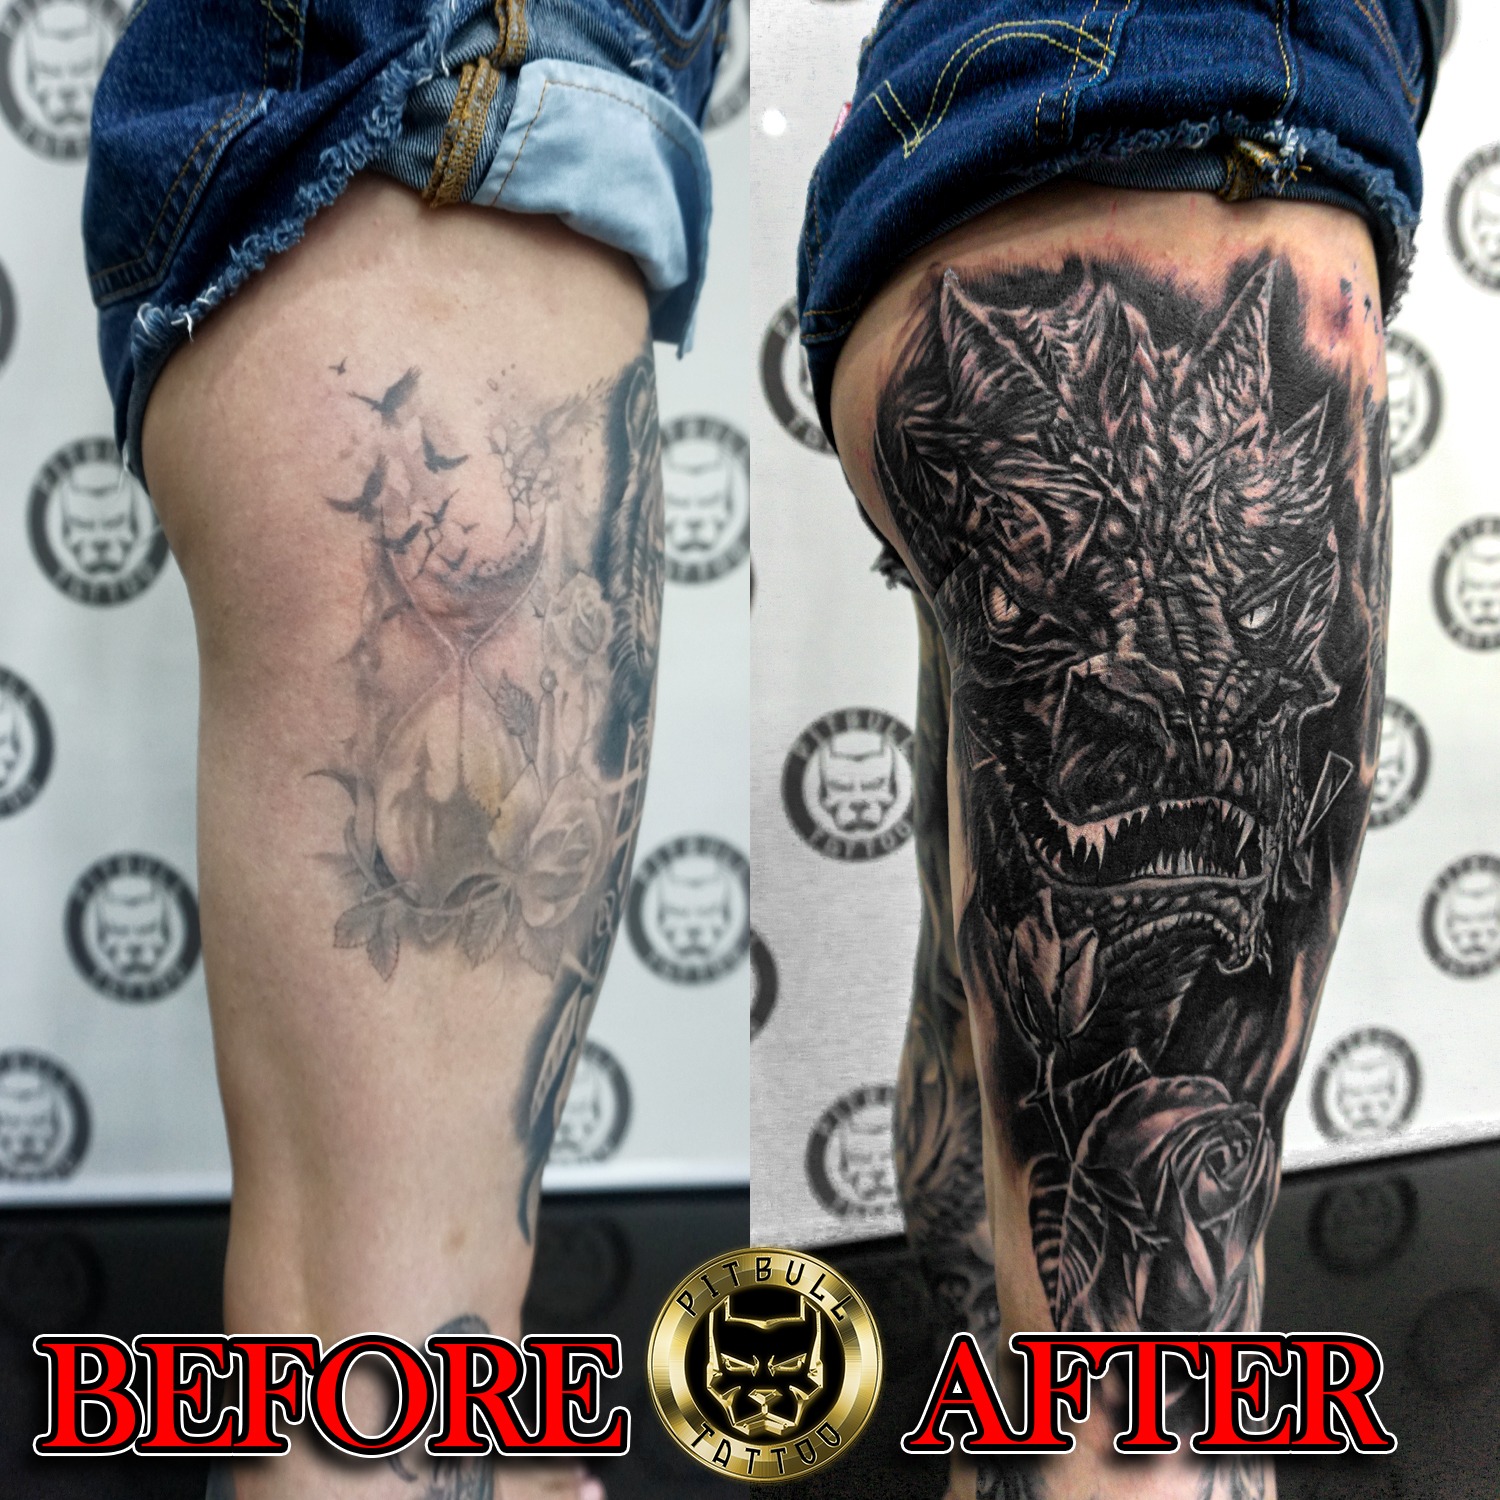 cover up tattoo  Blog  Independent Tattoo  Delawhere